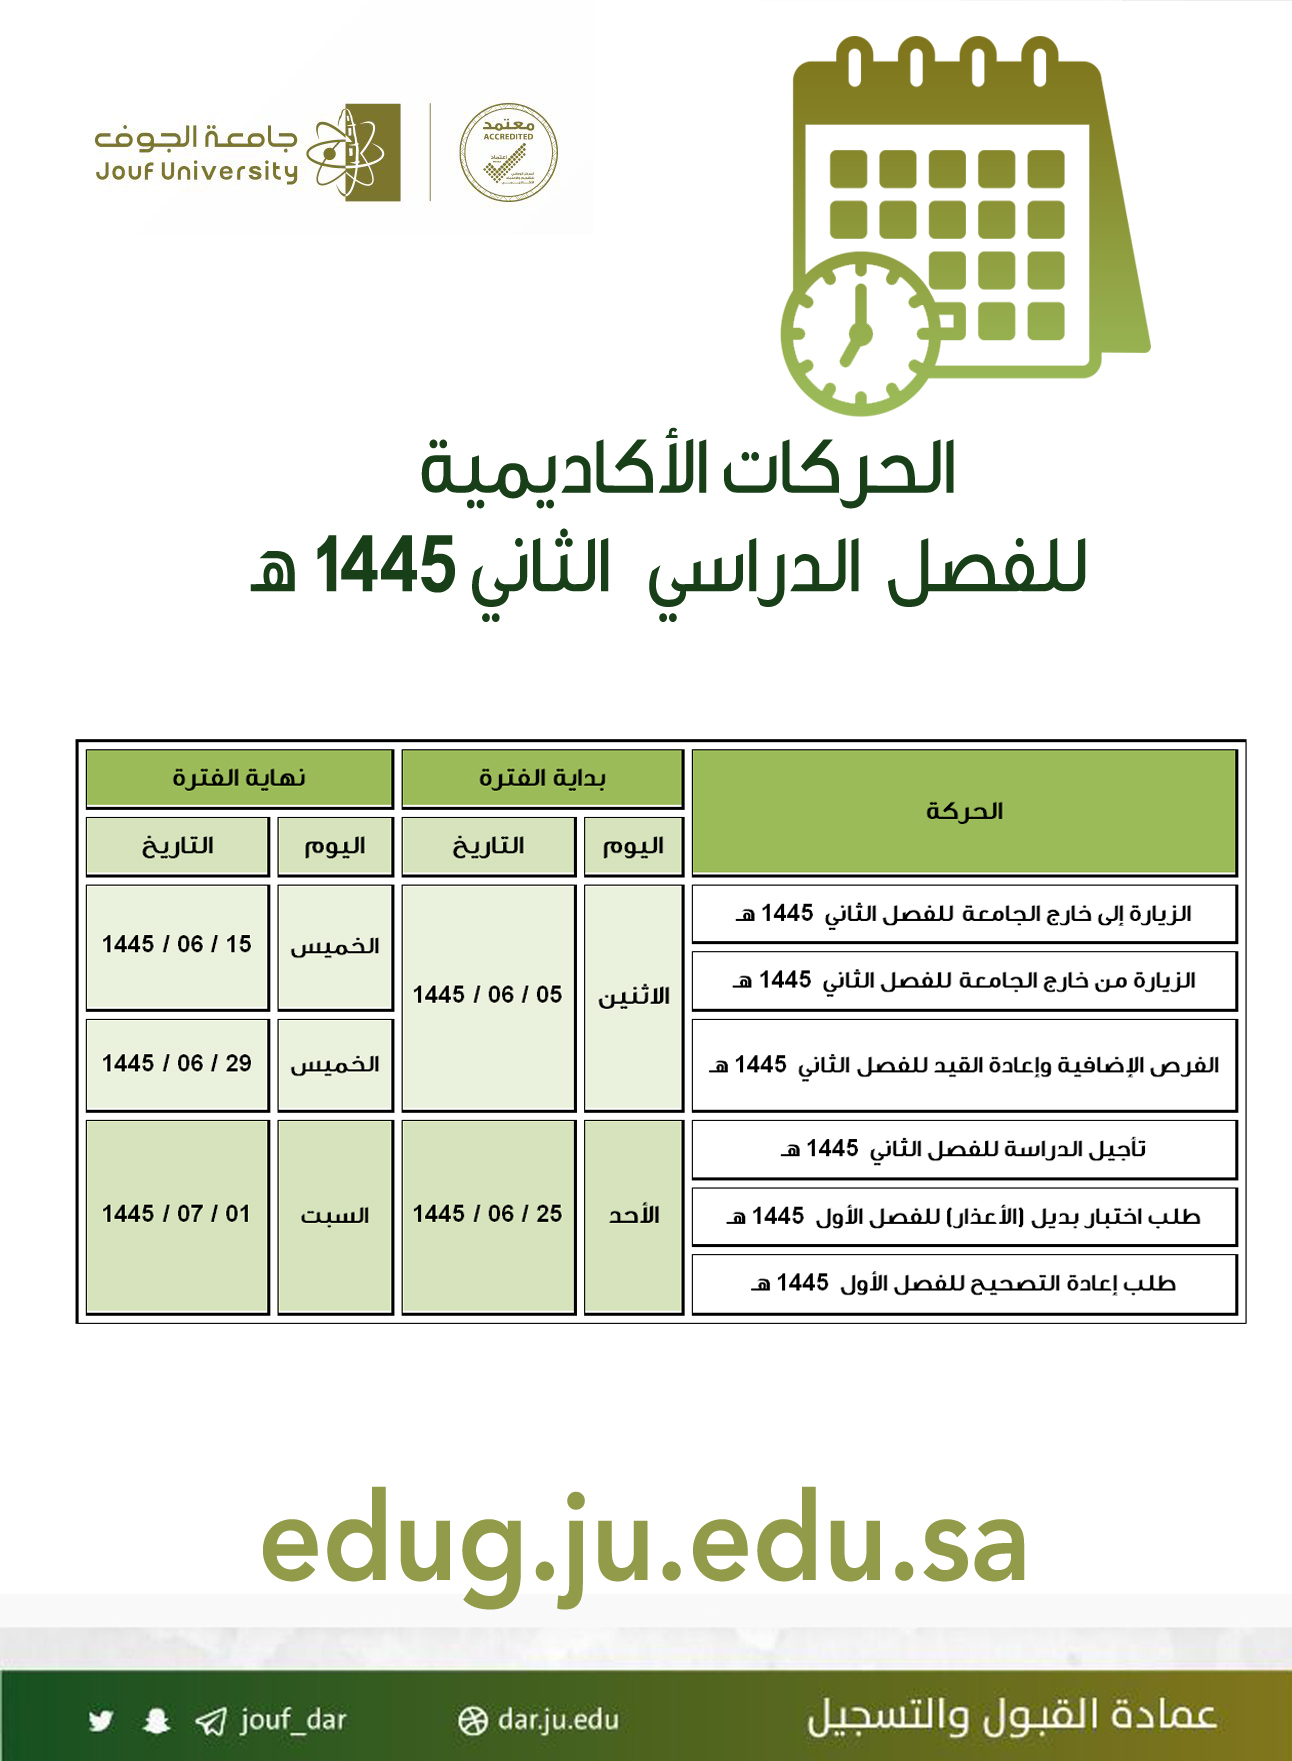 Academic movements available on the electronic portal for the second semester 1445 AH